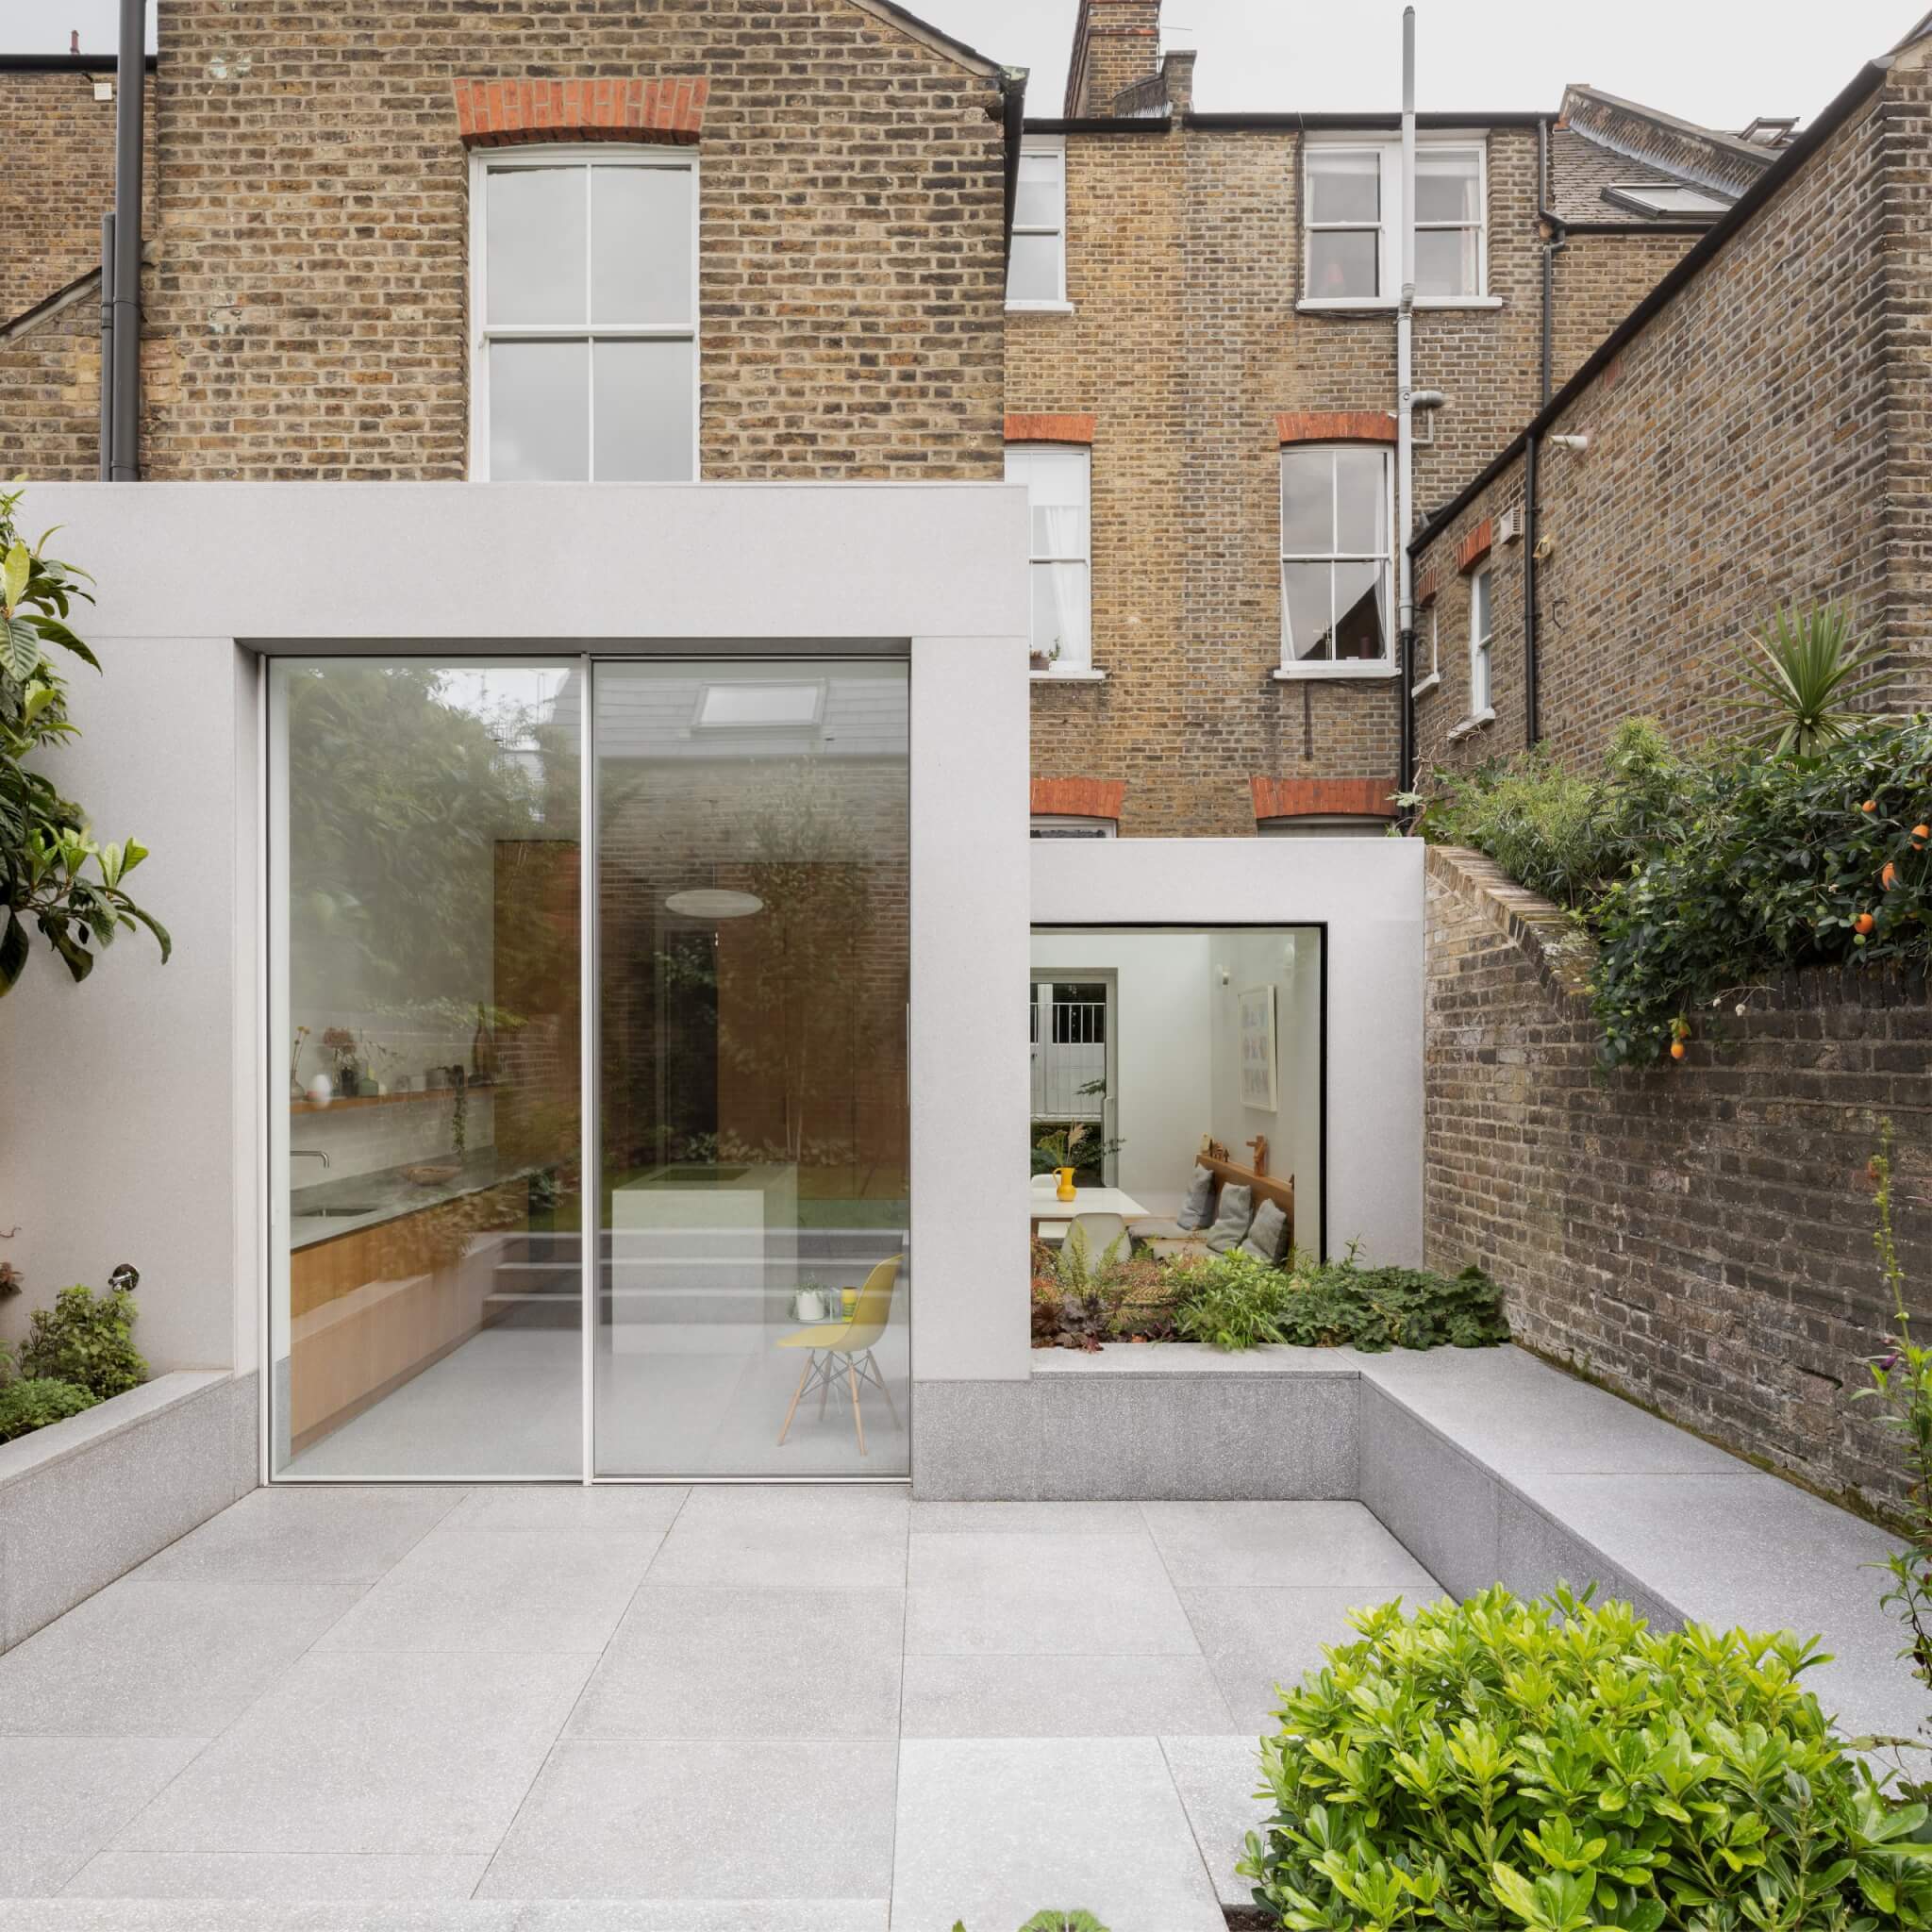 Maida Vale Terrazo extention and renovation rear extension 2